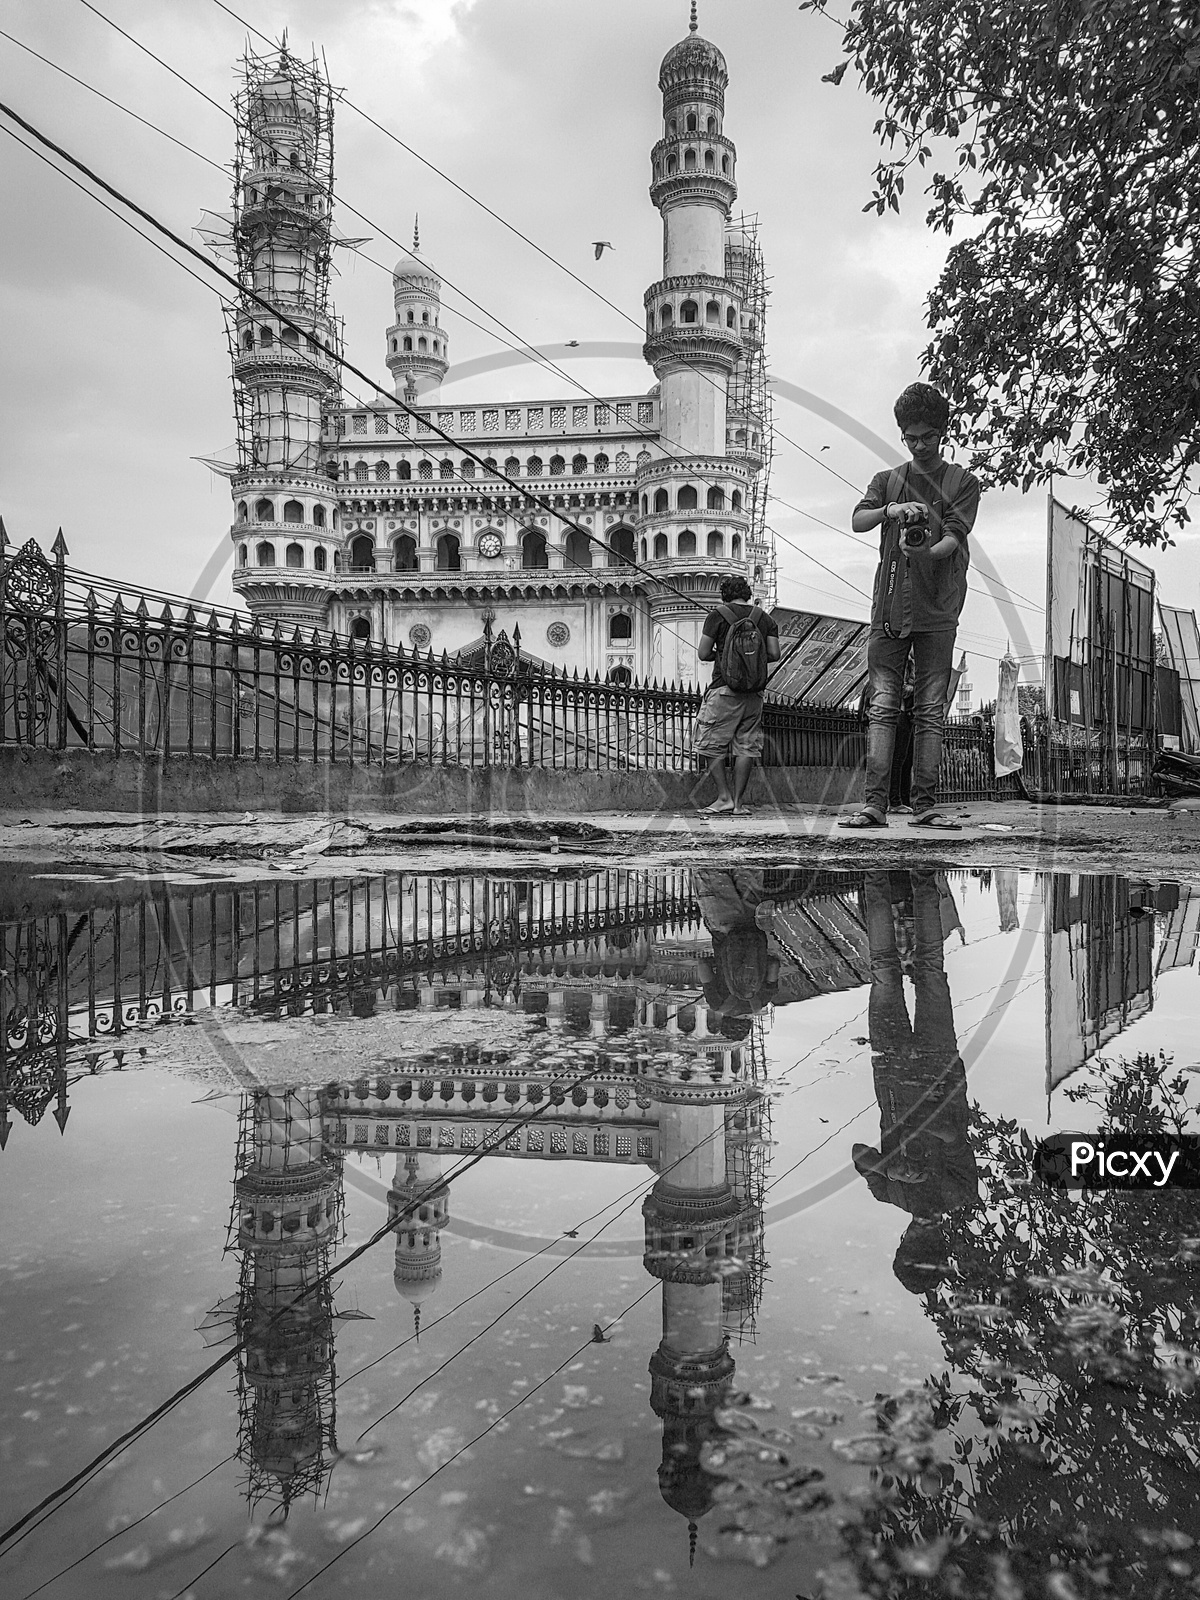 Photographers And Their Reflection on Water Surface At The Charminar